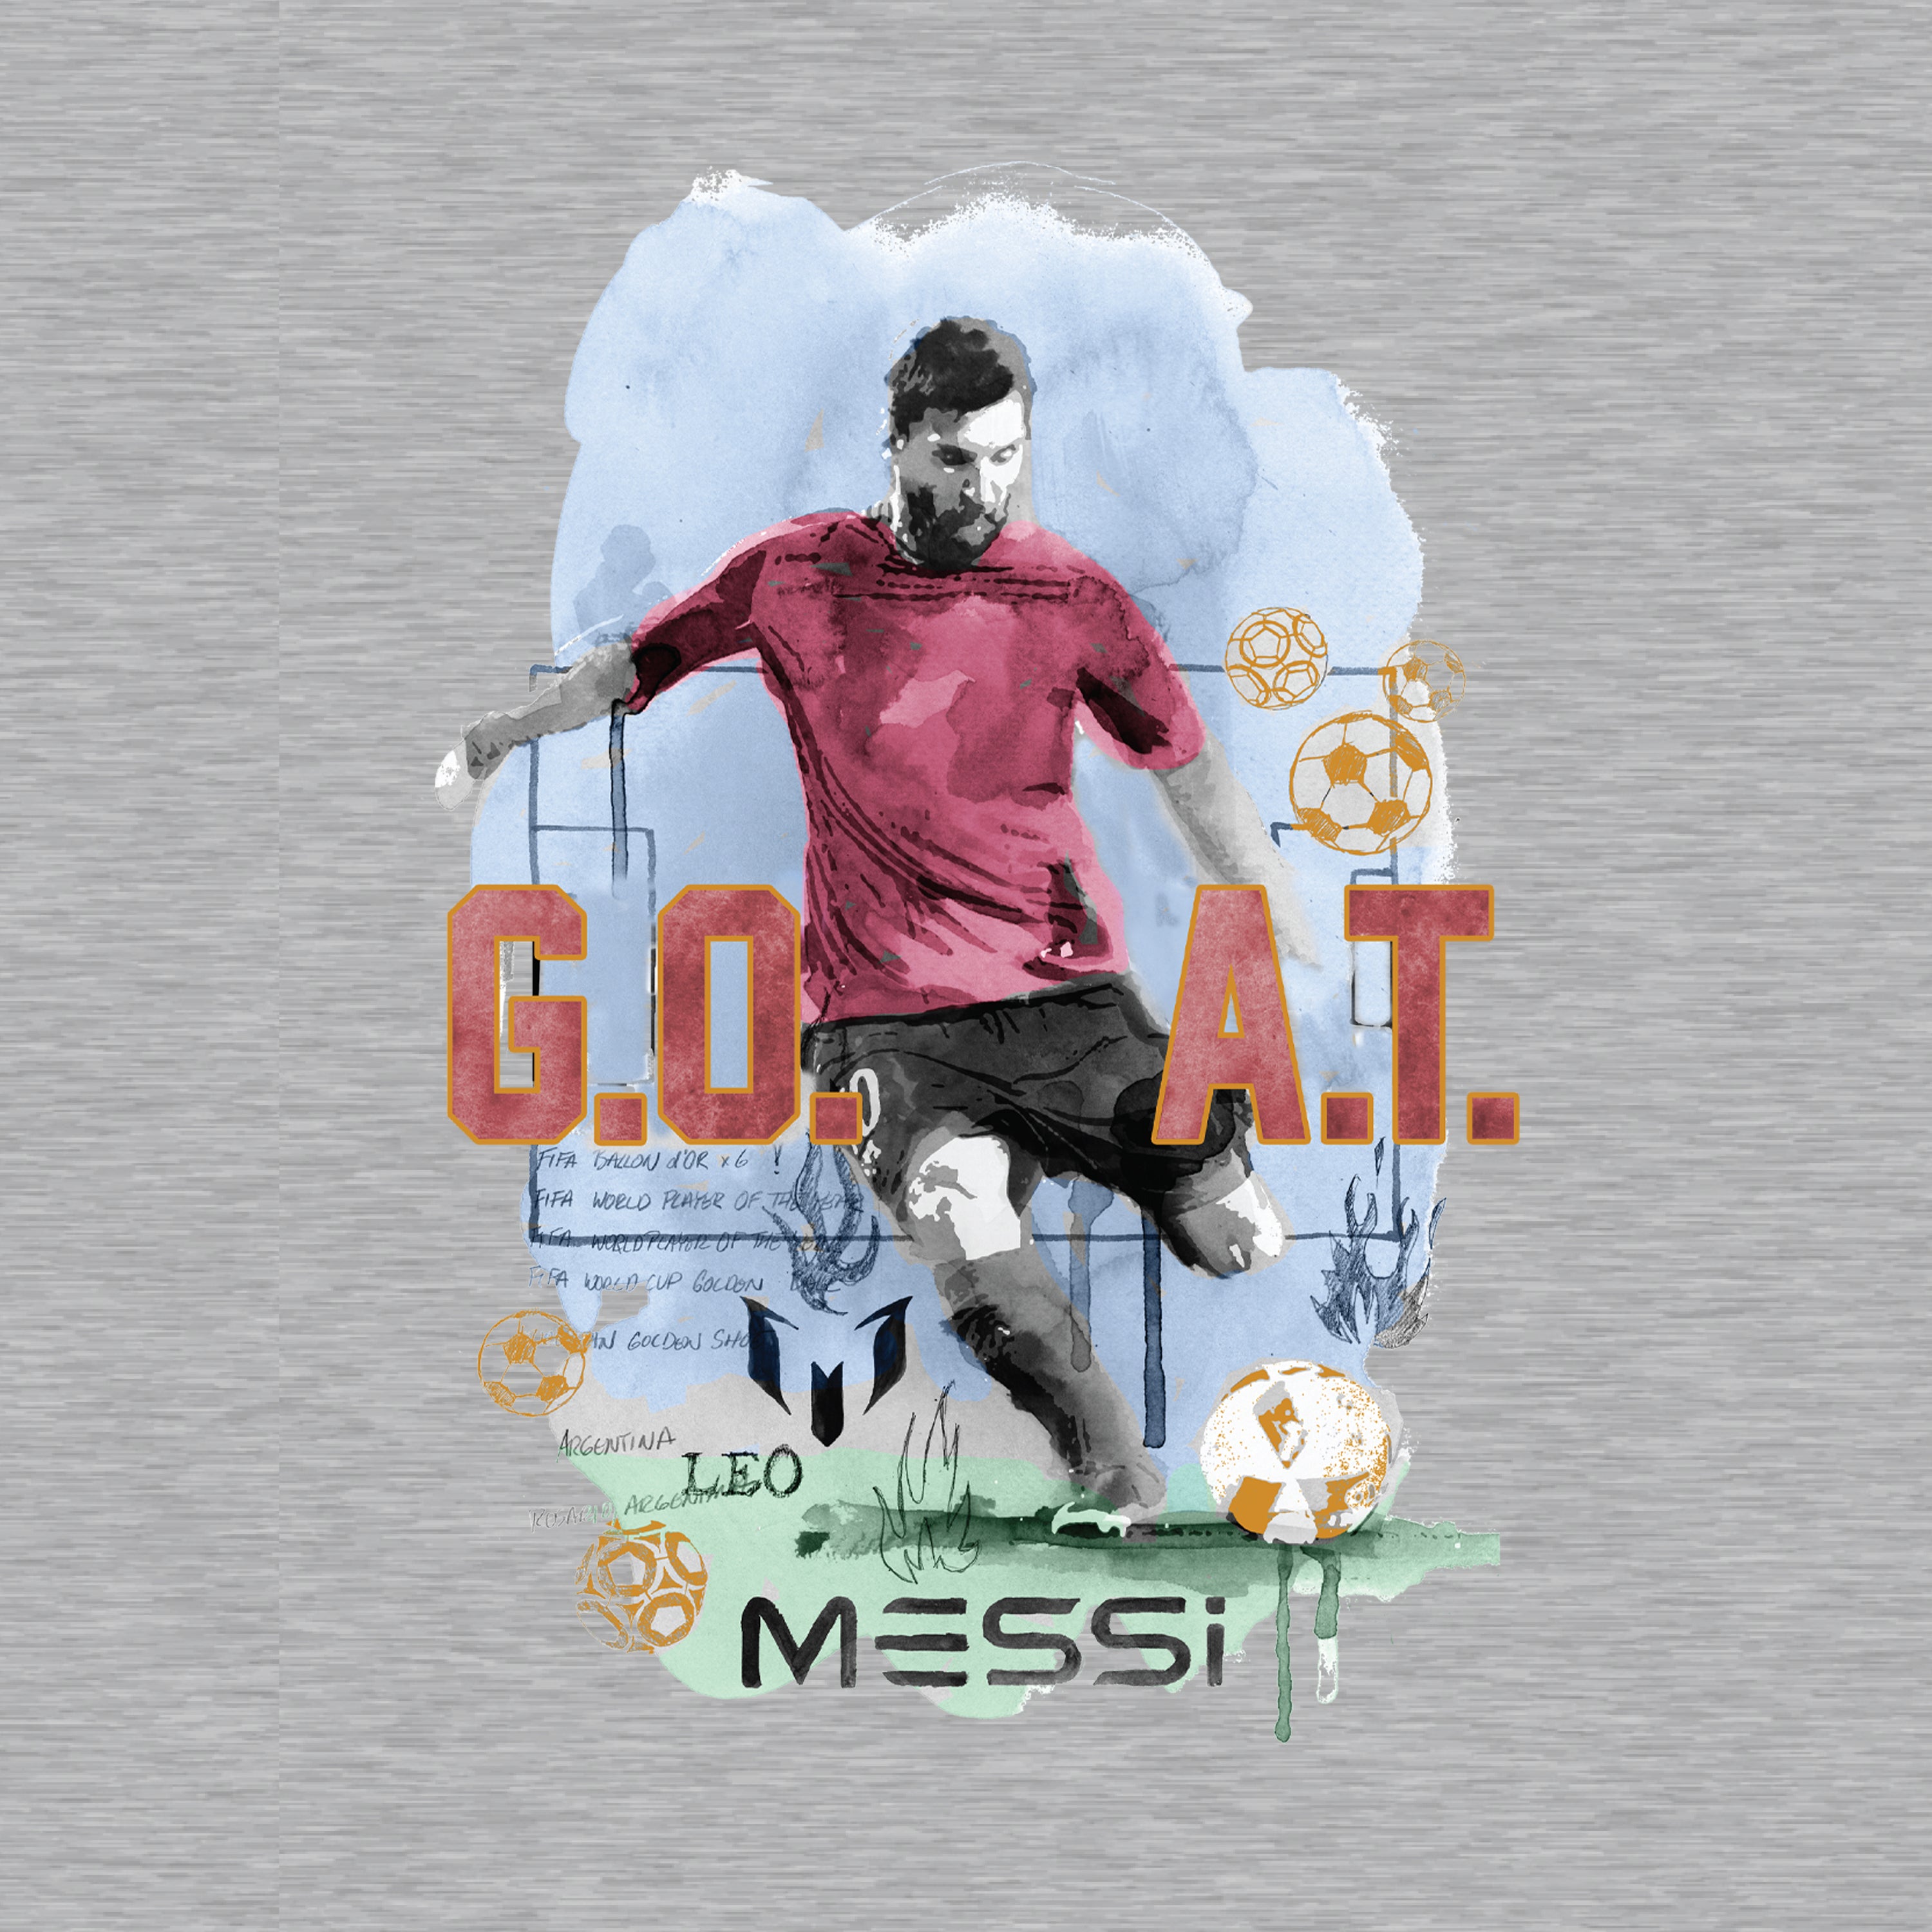 The G.O.A.T. Kid's Graphic T-Shirt